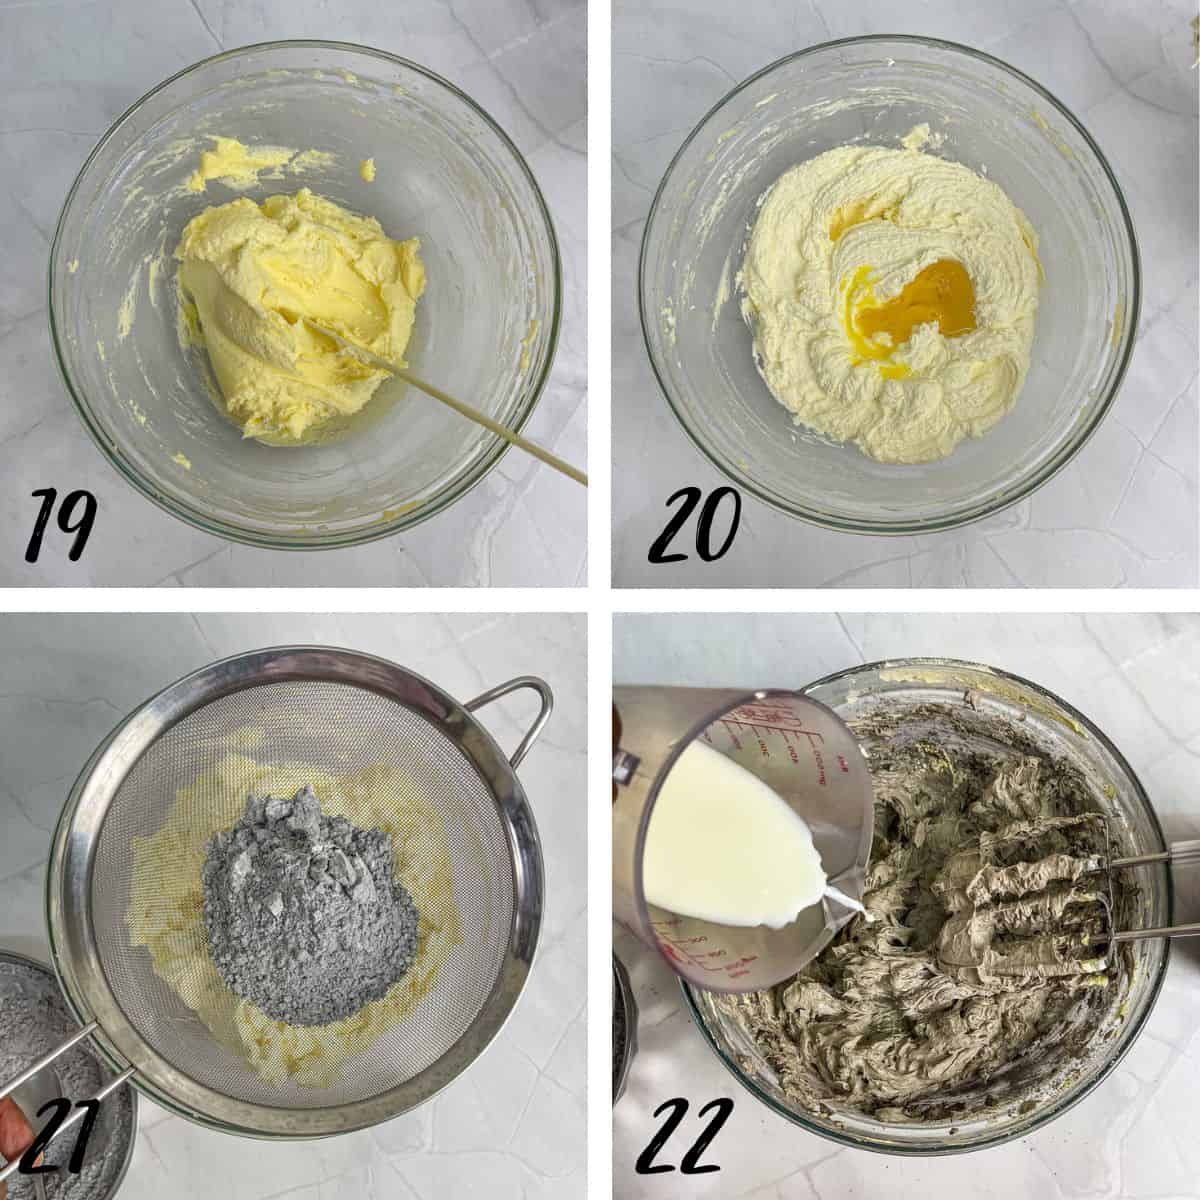 A poster f 4 images with creamed butter and sugar in one bowl, creamed butter and sugar and egg in another bowl, a sifter filled with flour and cocoa powder on top of a bowl, and pouring milk into a chocolate cake batter.